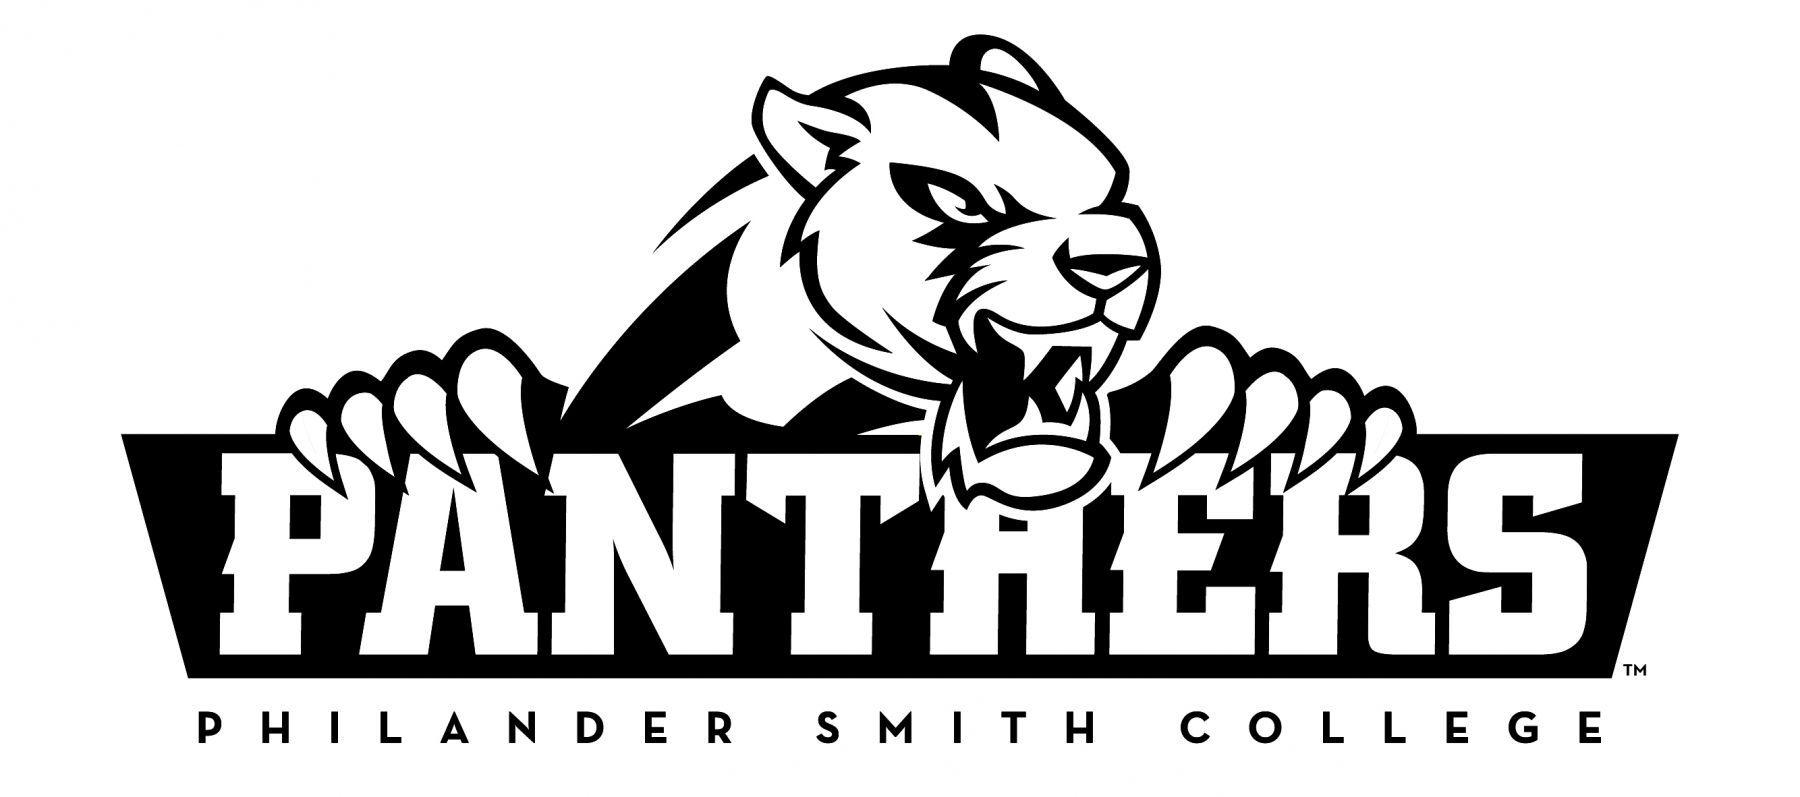 Panther College Logo - Quick Facts. Philander Smith College Athletics